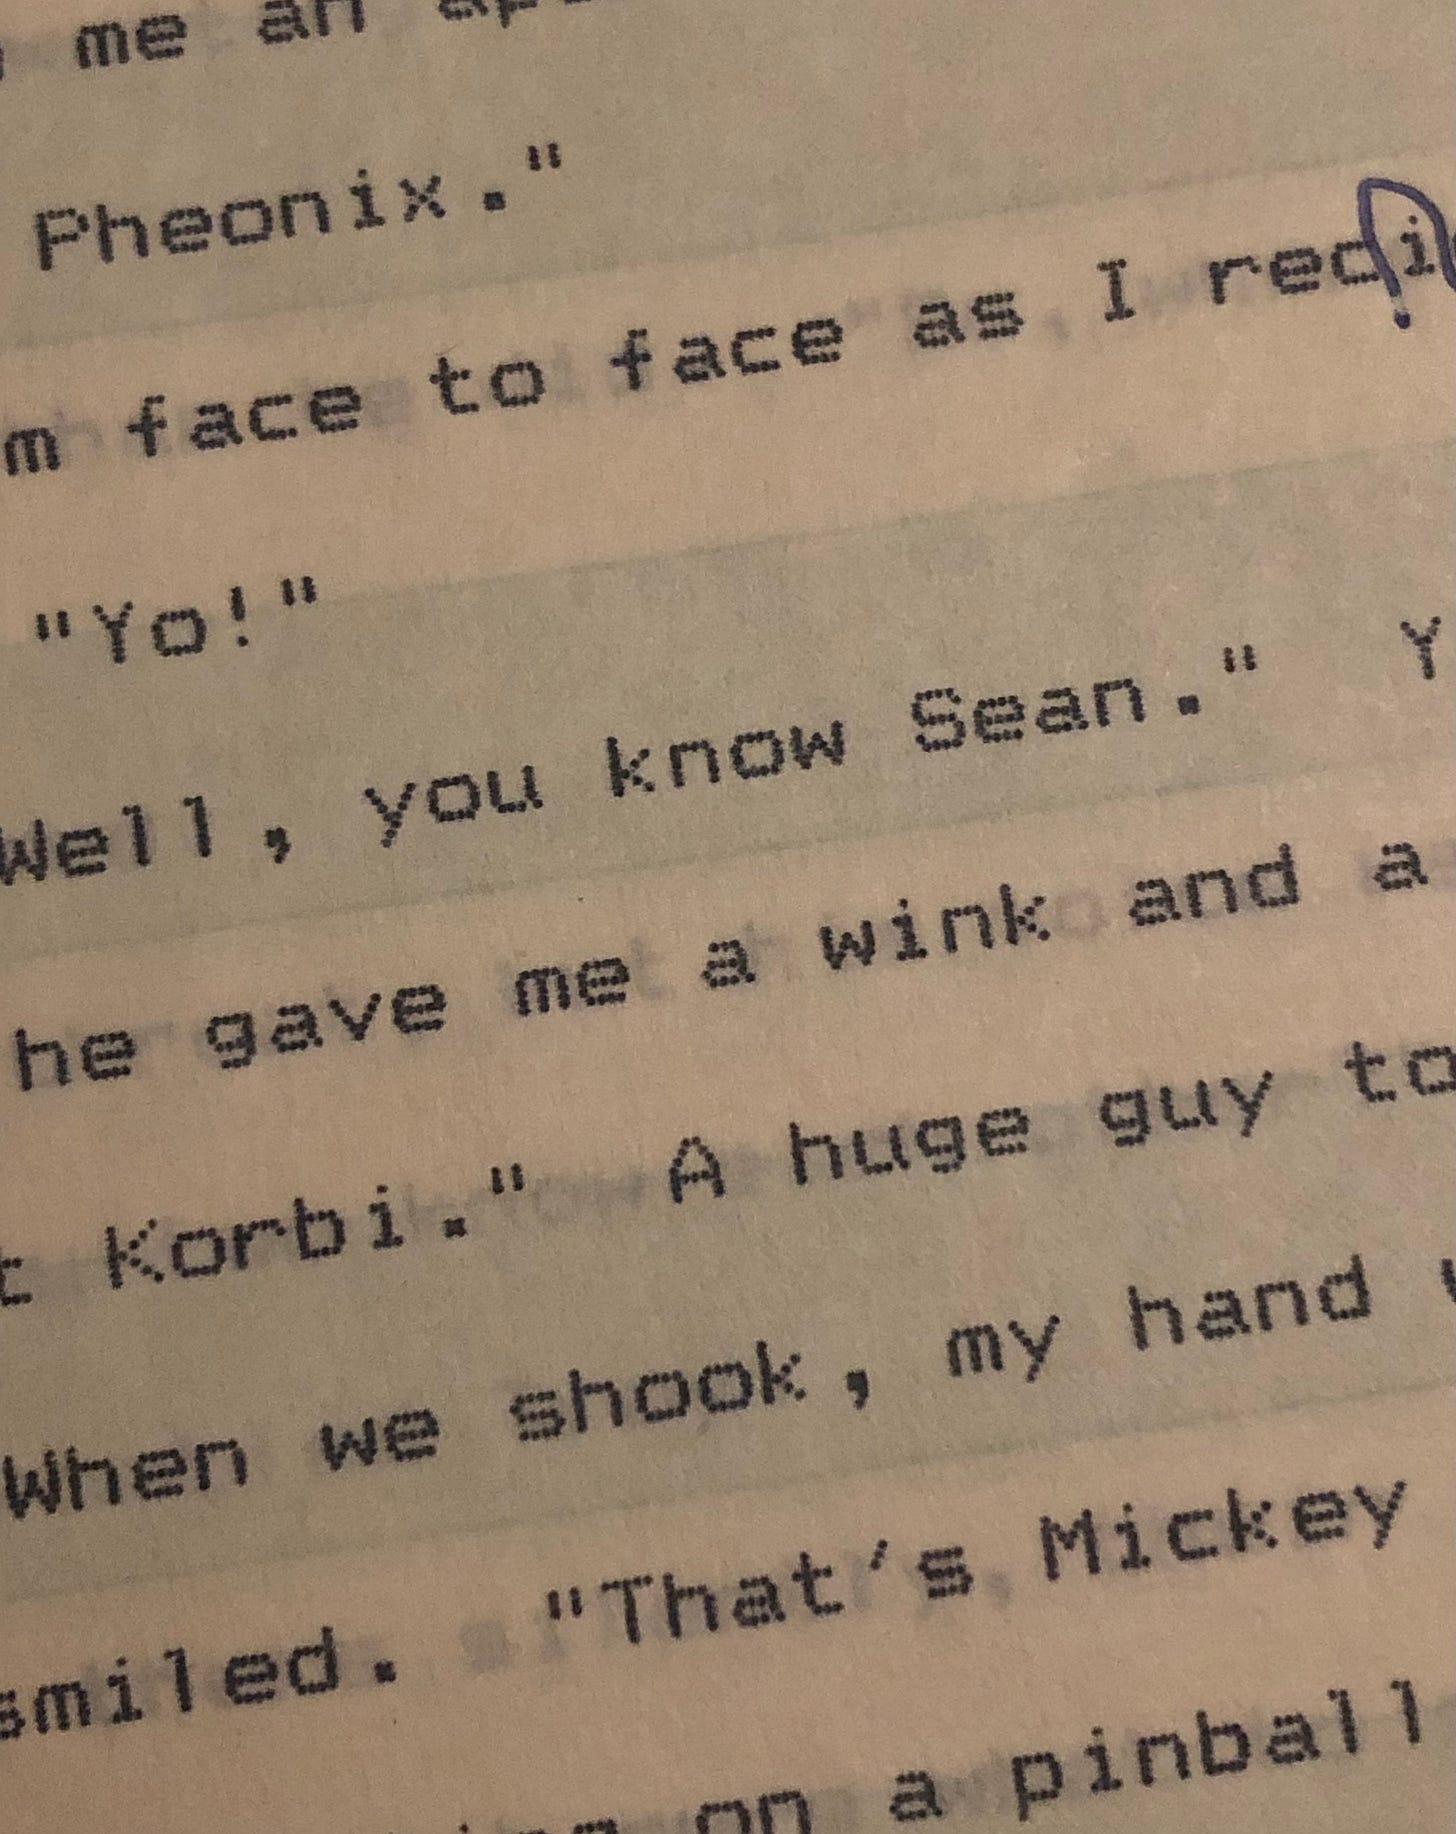 Scrap of my first novel's blue-and-white-striped dot matrix printout, showing the name Phoenix with the E and O reversed, along with some other cheesy dialogue snippets and a few other main character intros. You do not get to read any full sentences of the blackmail fodder. No way, Jose!